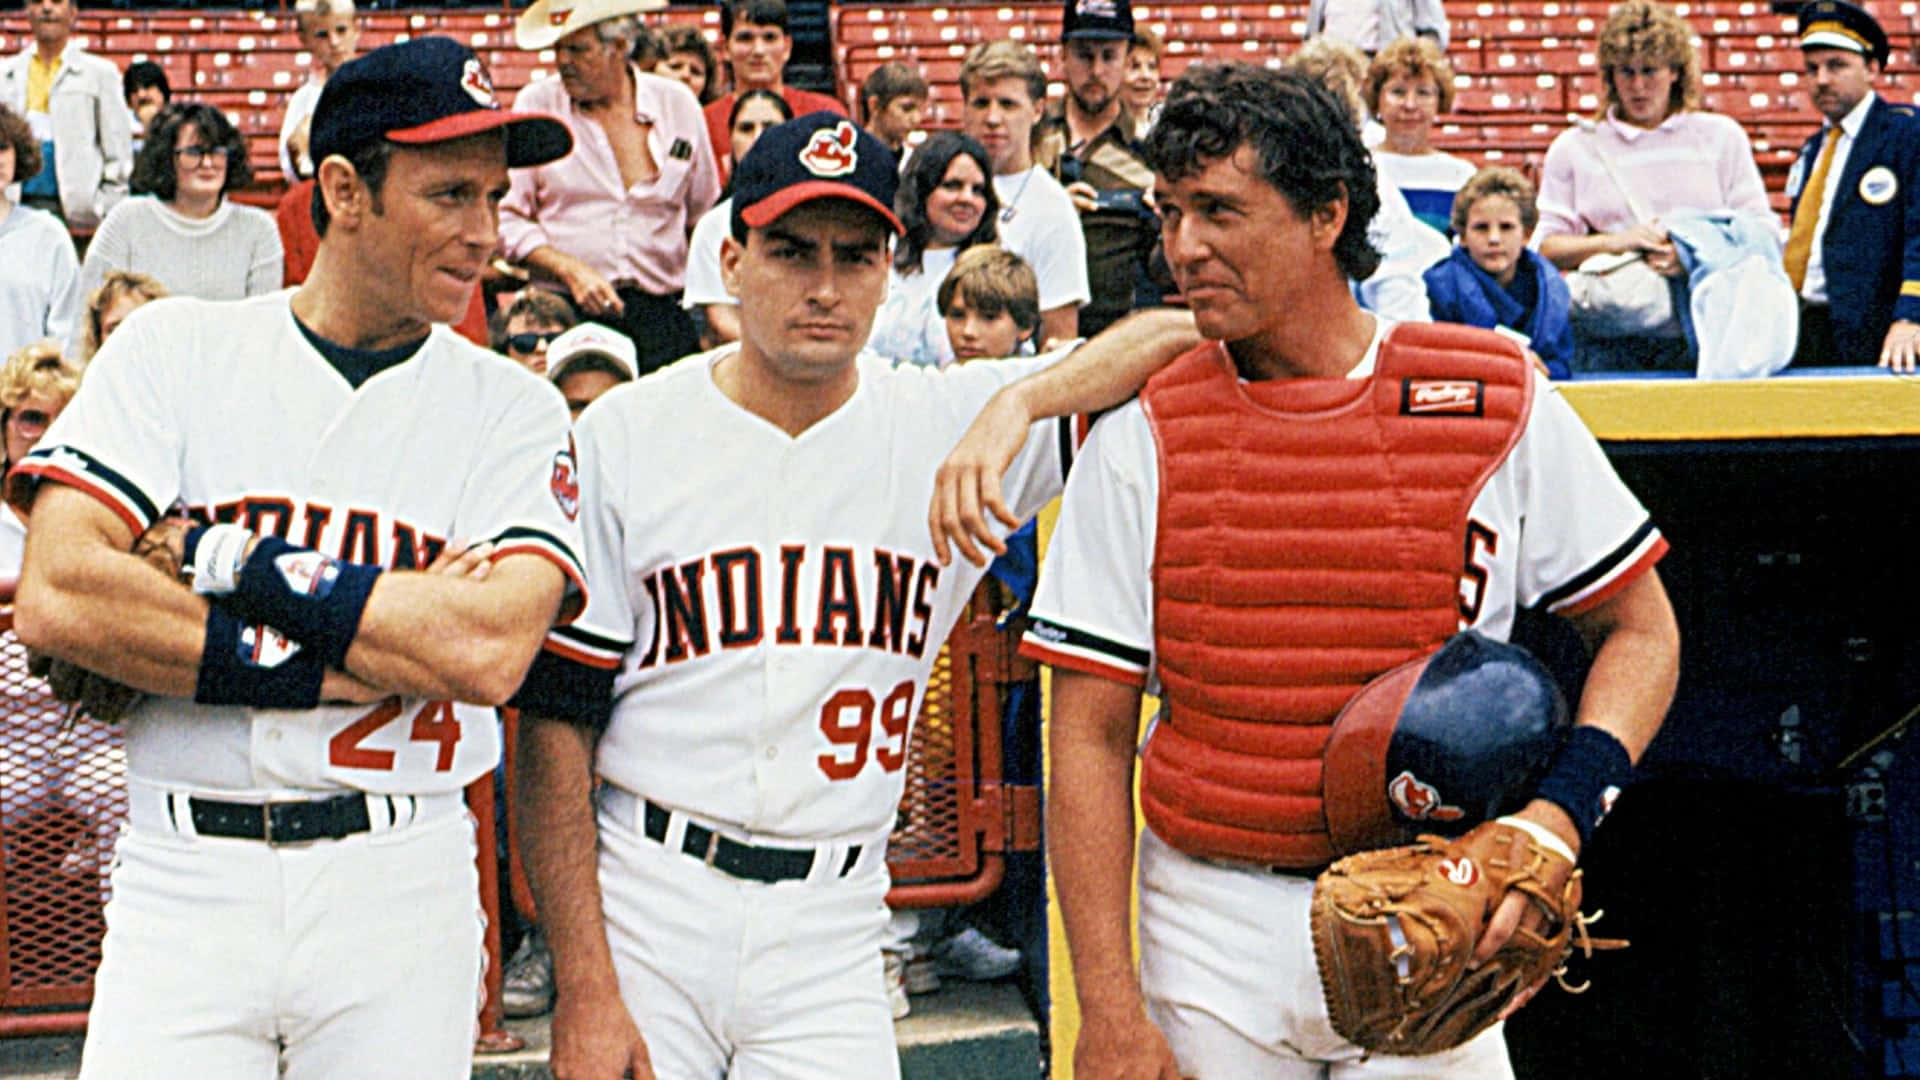 Major League Movie team members standing together on the field Wallpaper